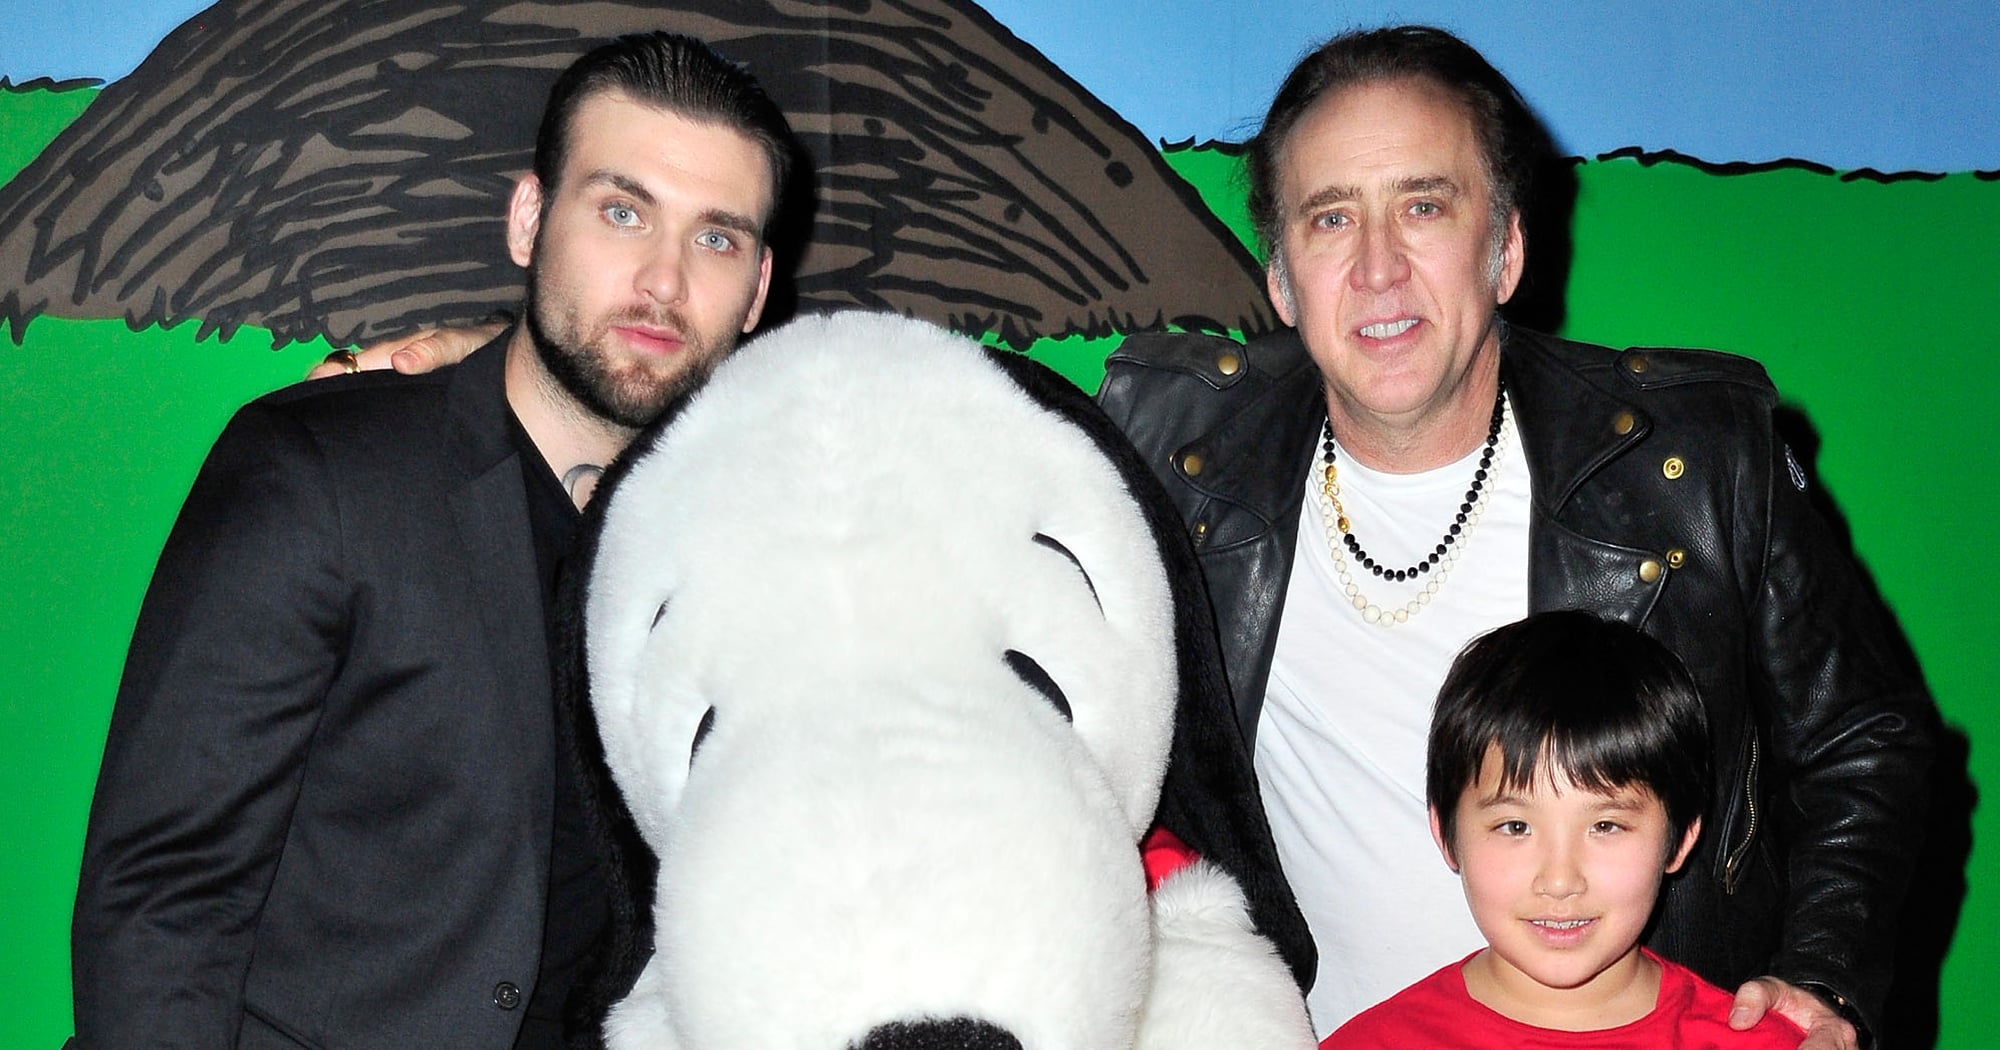 How Many Kids Does Nicolas Cage Have?